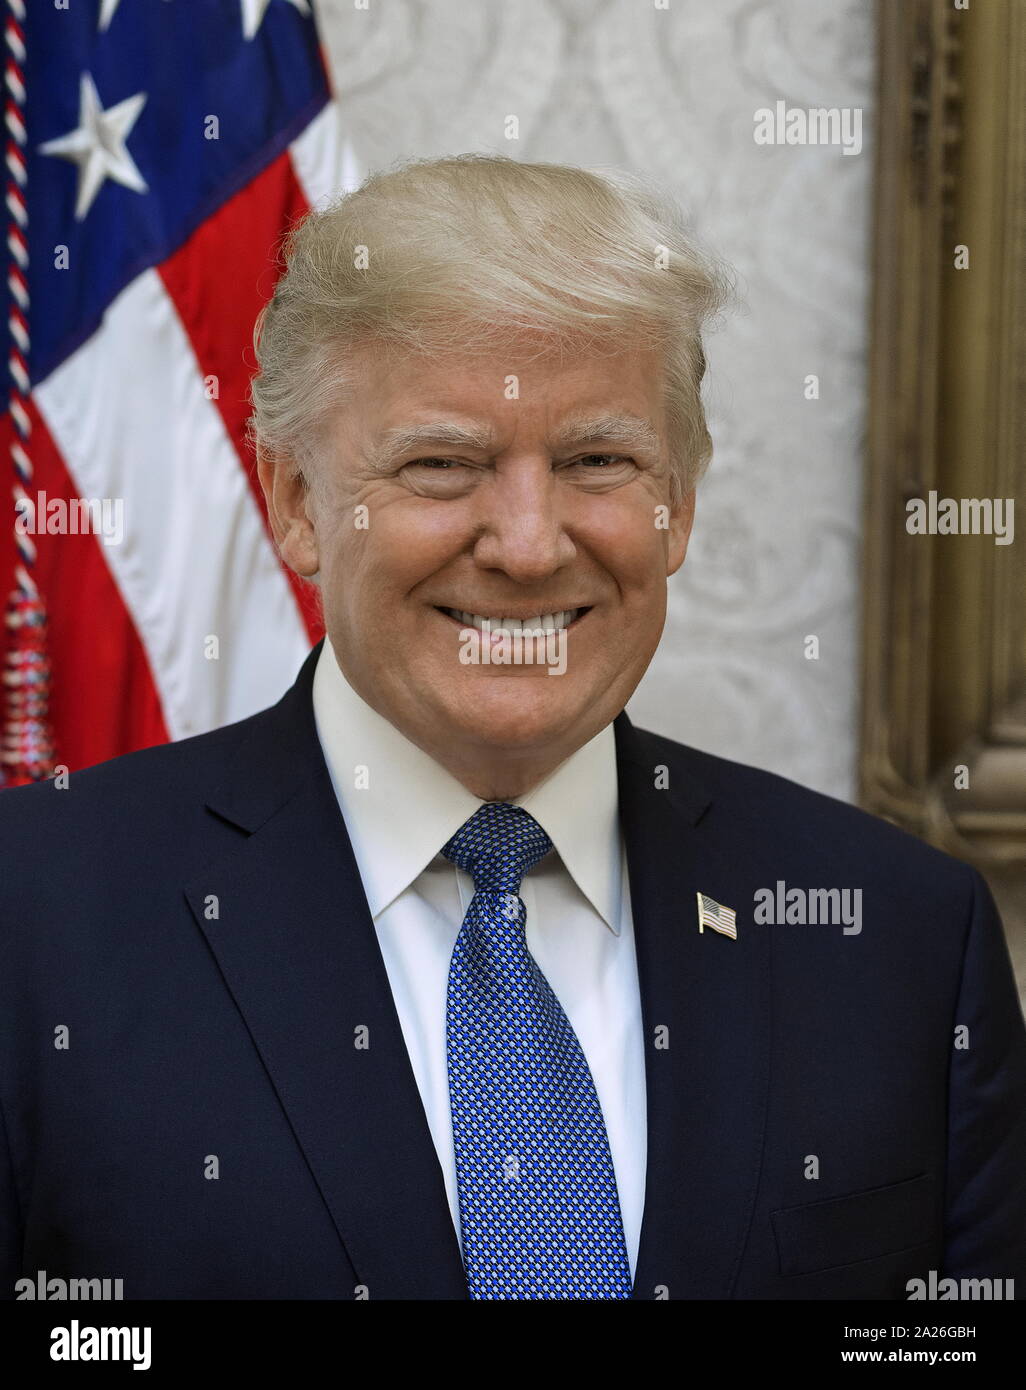 Donald John Trump (born June 14, 1946), President of the United States (2017-). Before entering politics, he was a businessman and television personality. Stock Photo